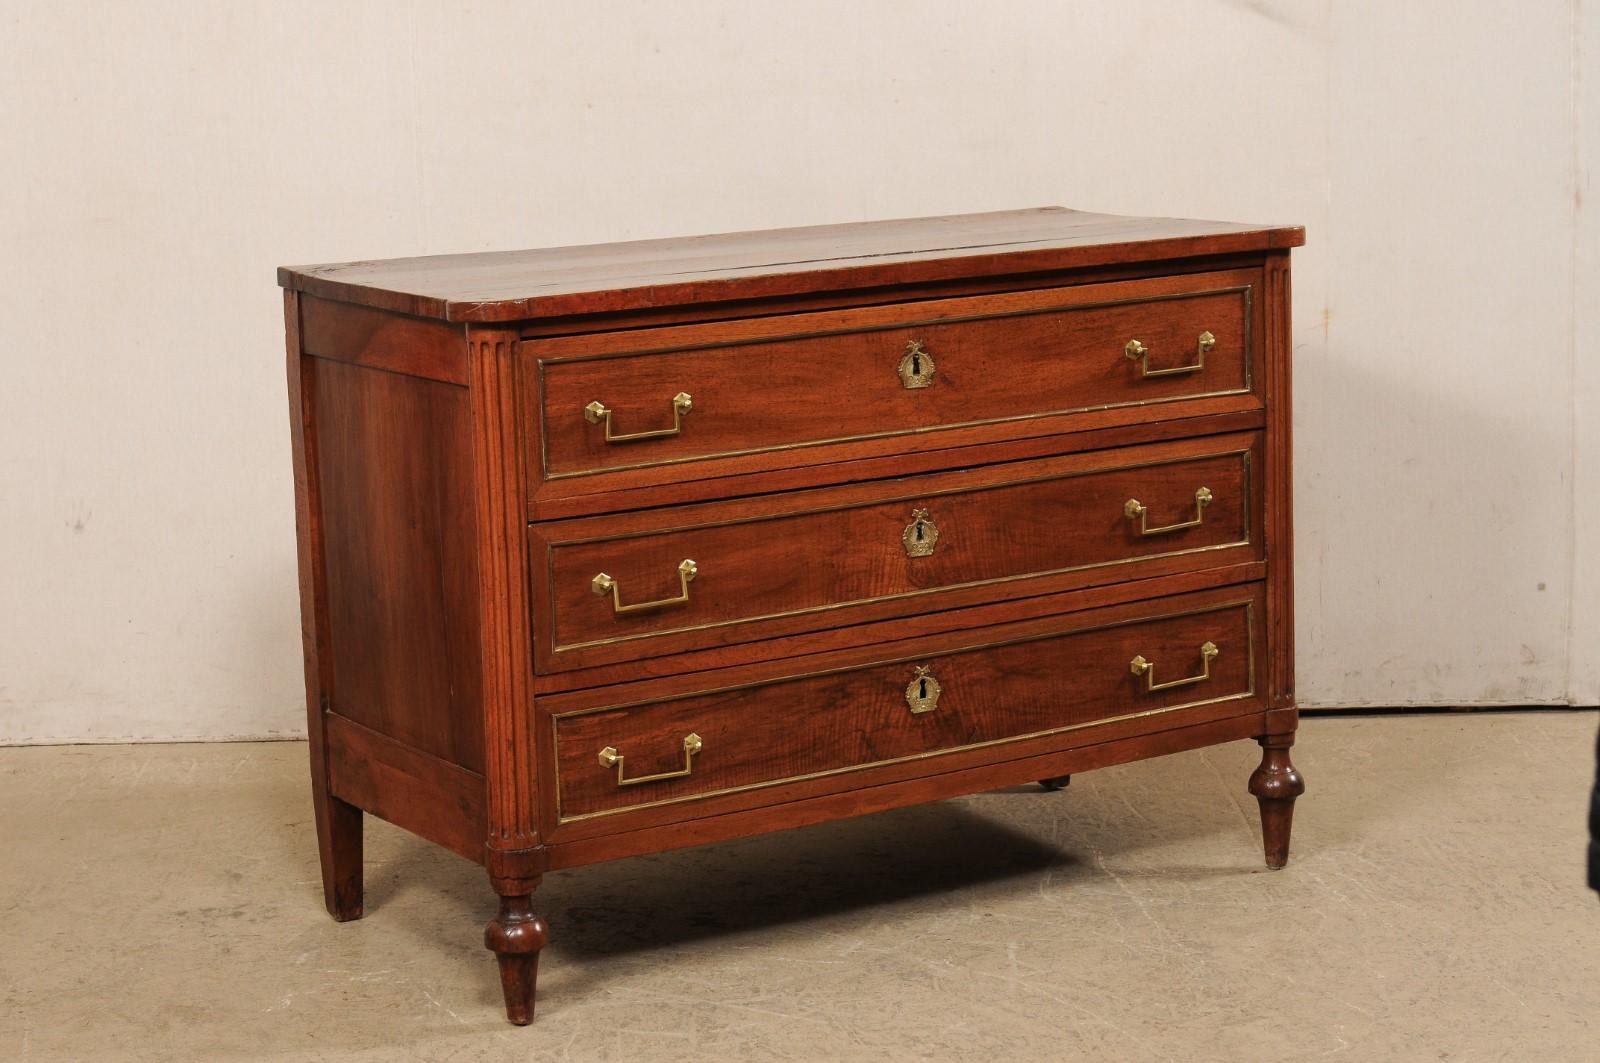 A French Neoclassical commode, with hidden secretary and original hardware, from the turn of the 18th and 19th century. This antique commode from France gives the appearance of being a three drawer chest at first glance. However, discreetly hidden